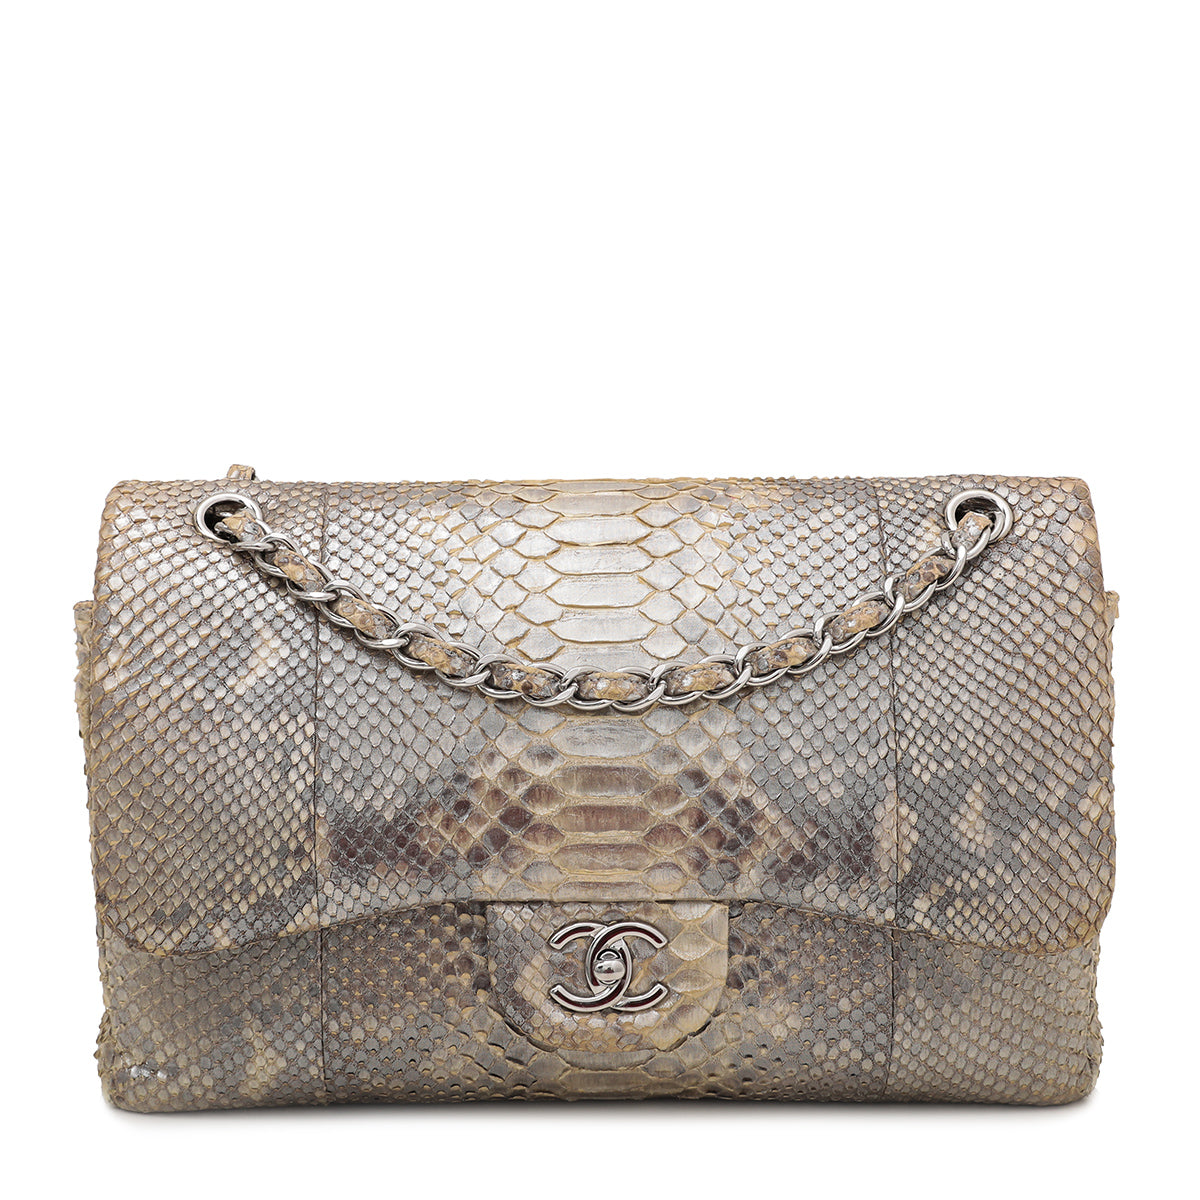 Chanel Classic Double Flap Python Bag  Prestige Online Store  Luxury  Items with Exceptional Savings from the eShop